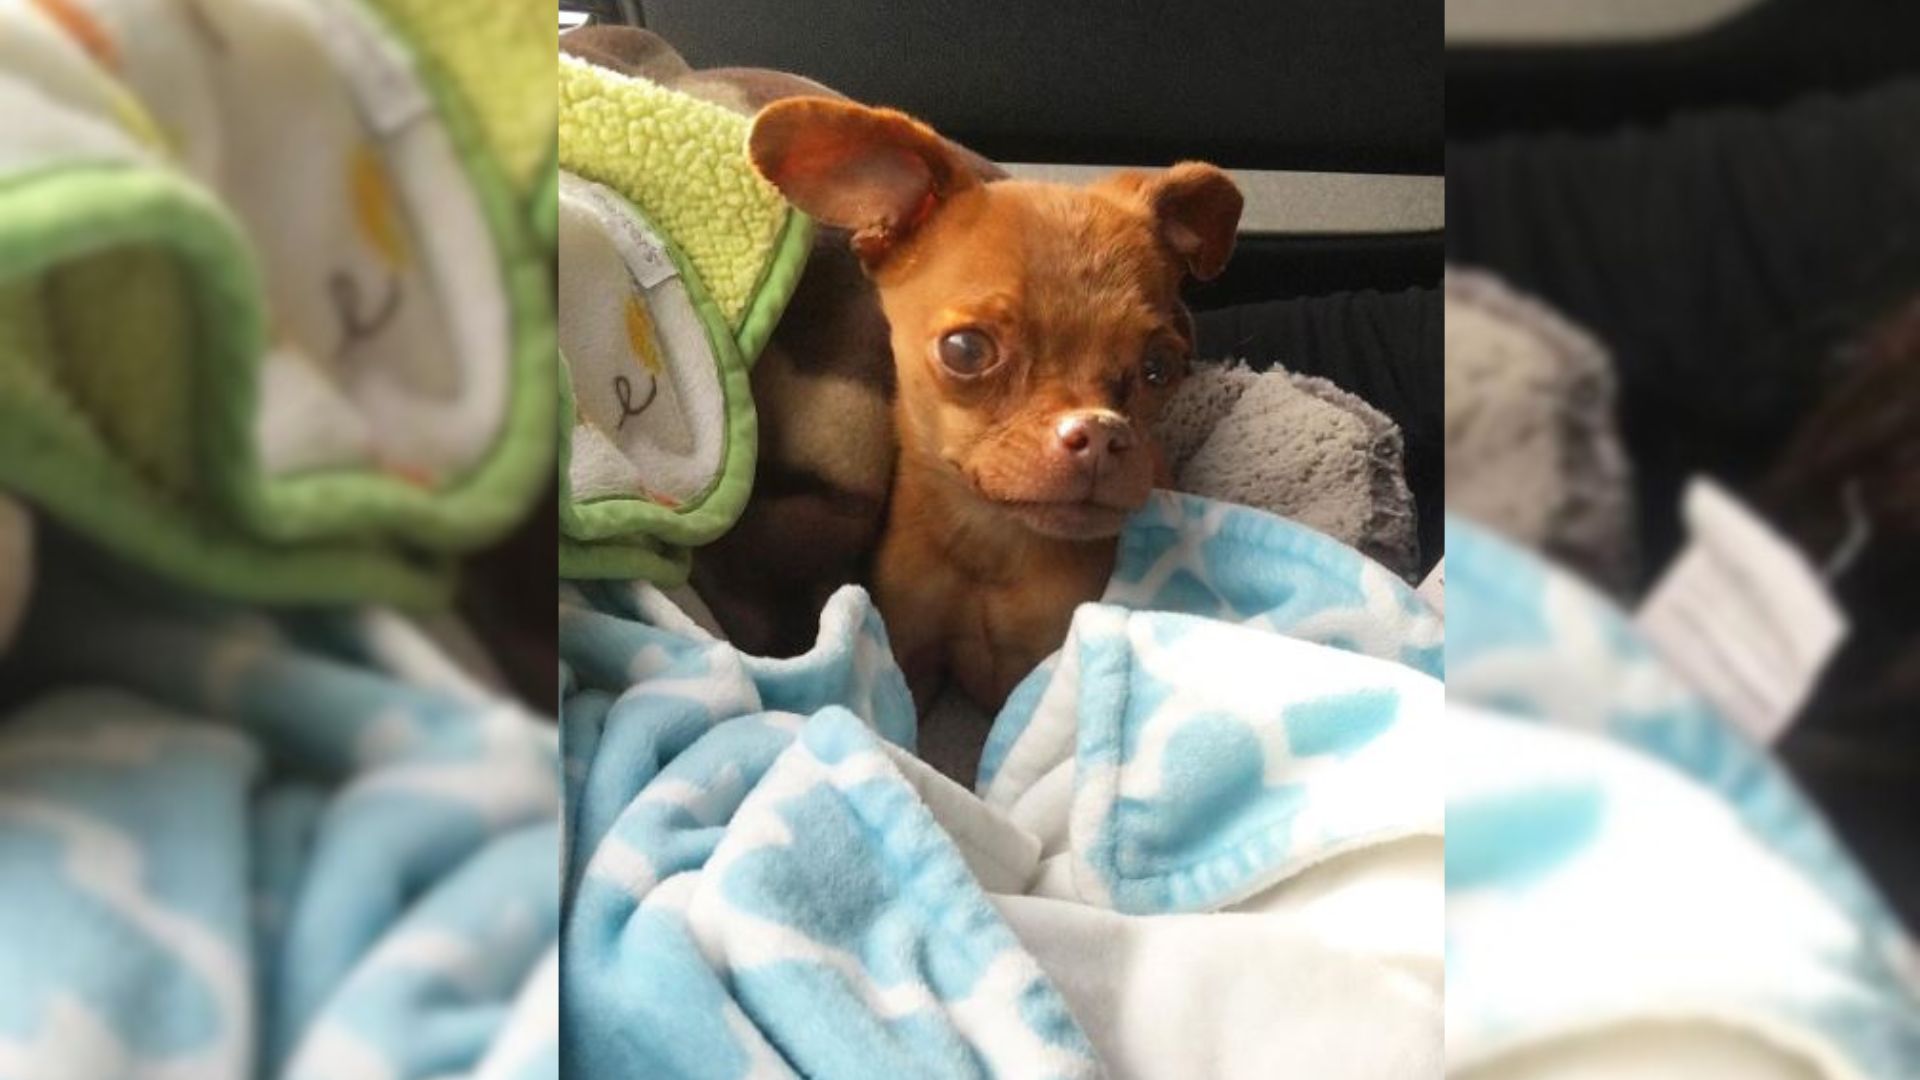 This Tiny Dog Was Facing Euthanasia Due To Breathing Issues, But Then A Woman Stepped In